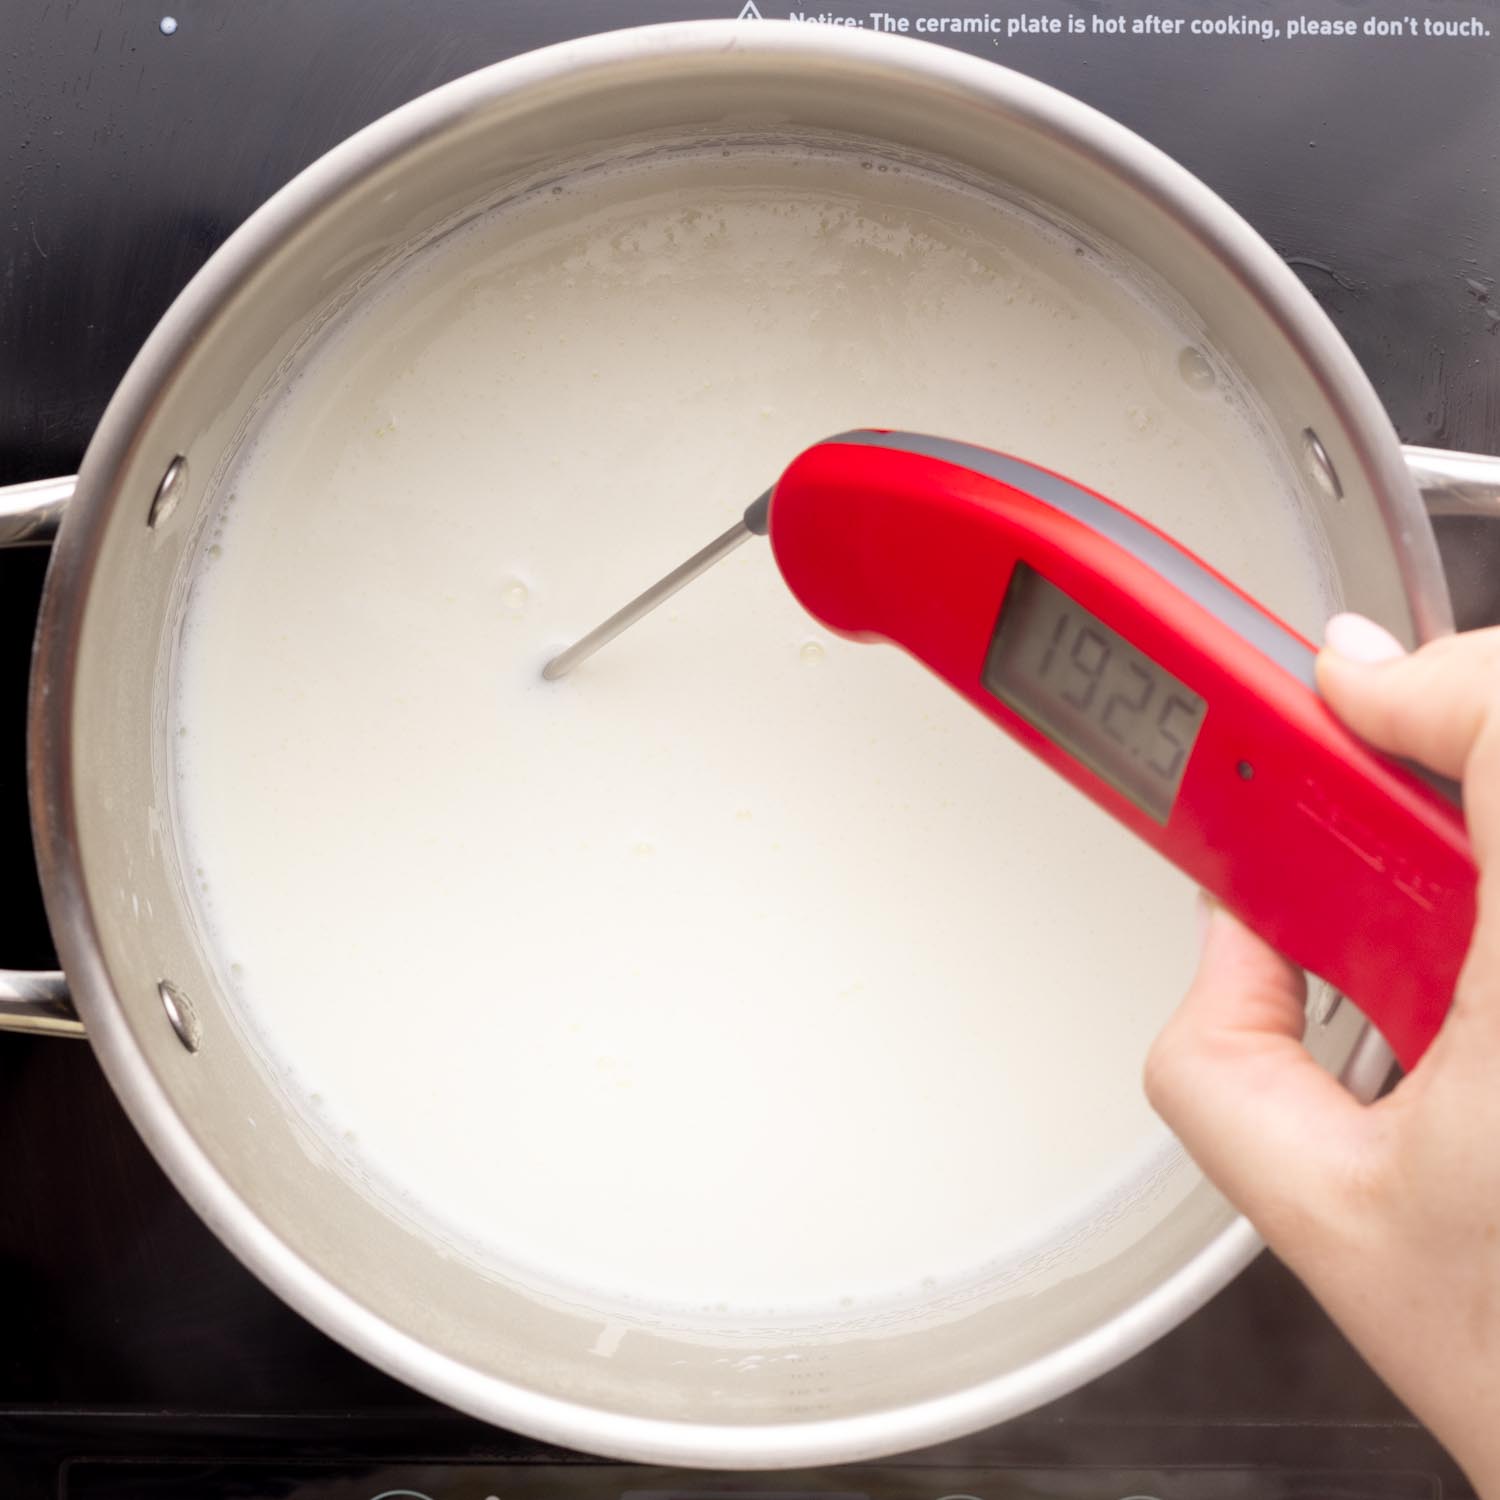 Taking the temperature of milk in a pot using a red thermapen